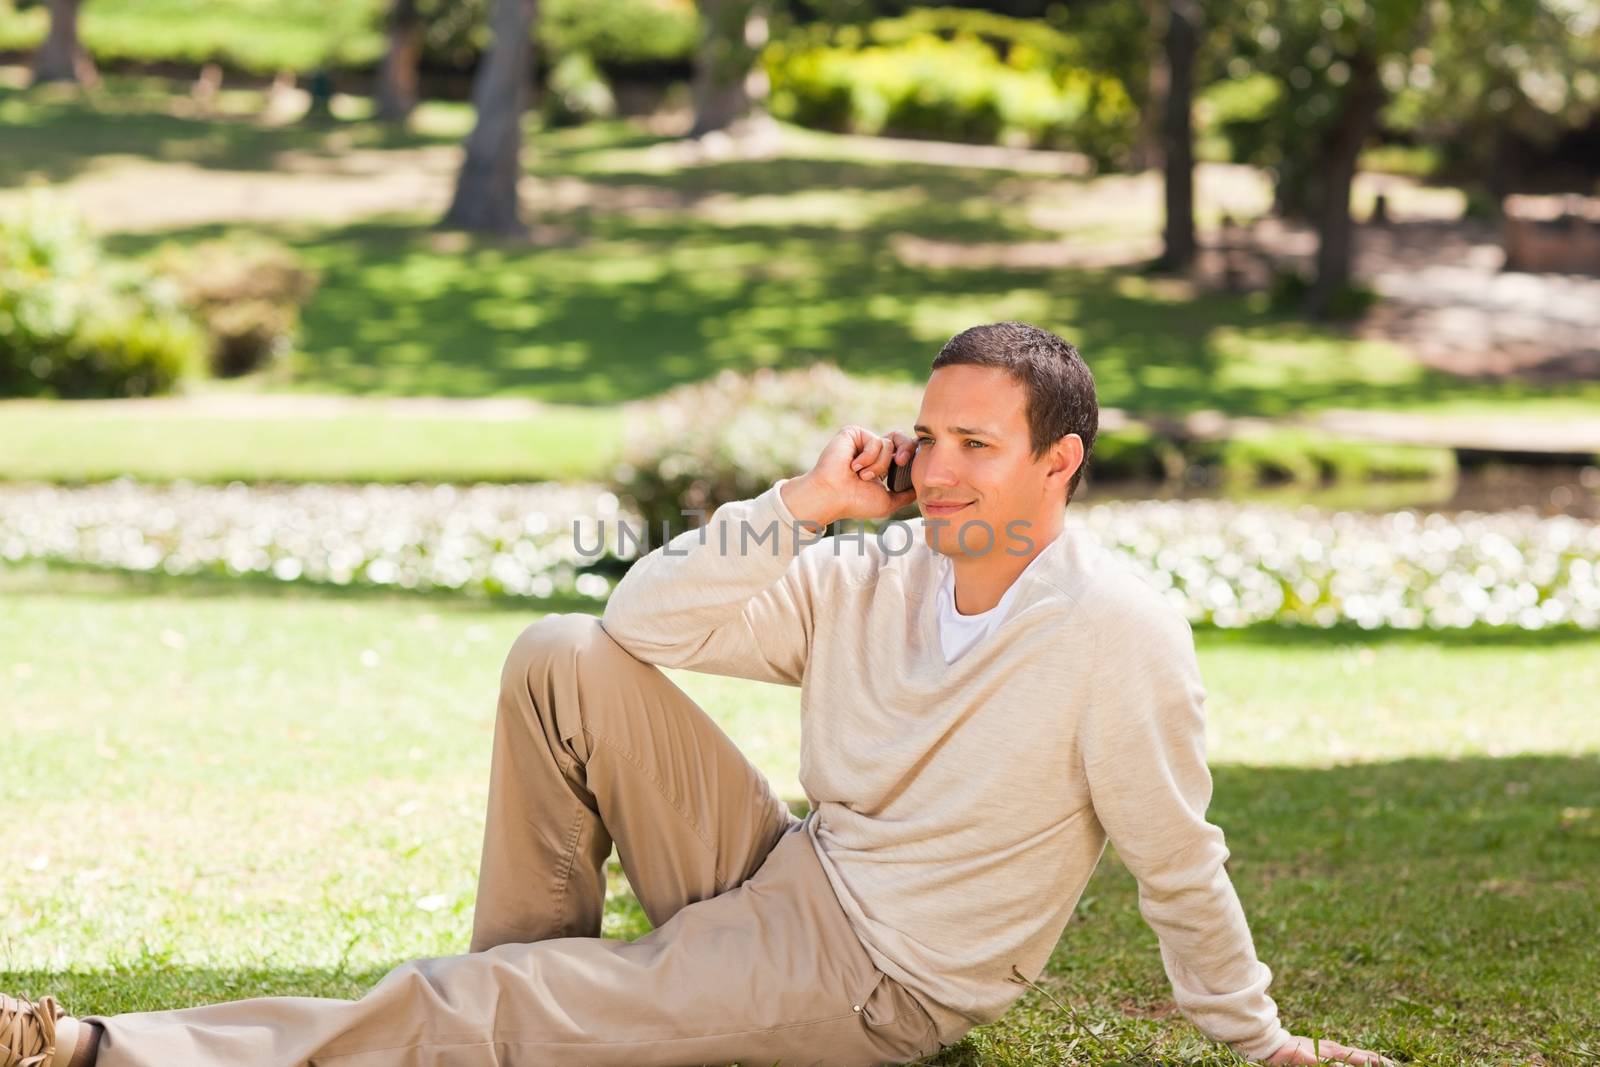 Man phoning in the park during the summer 